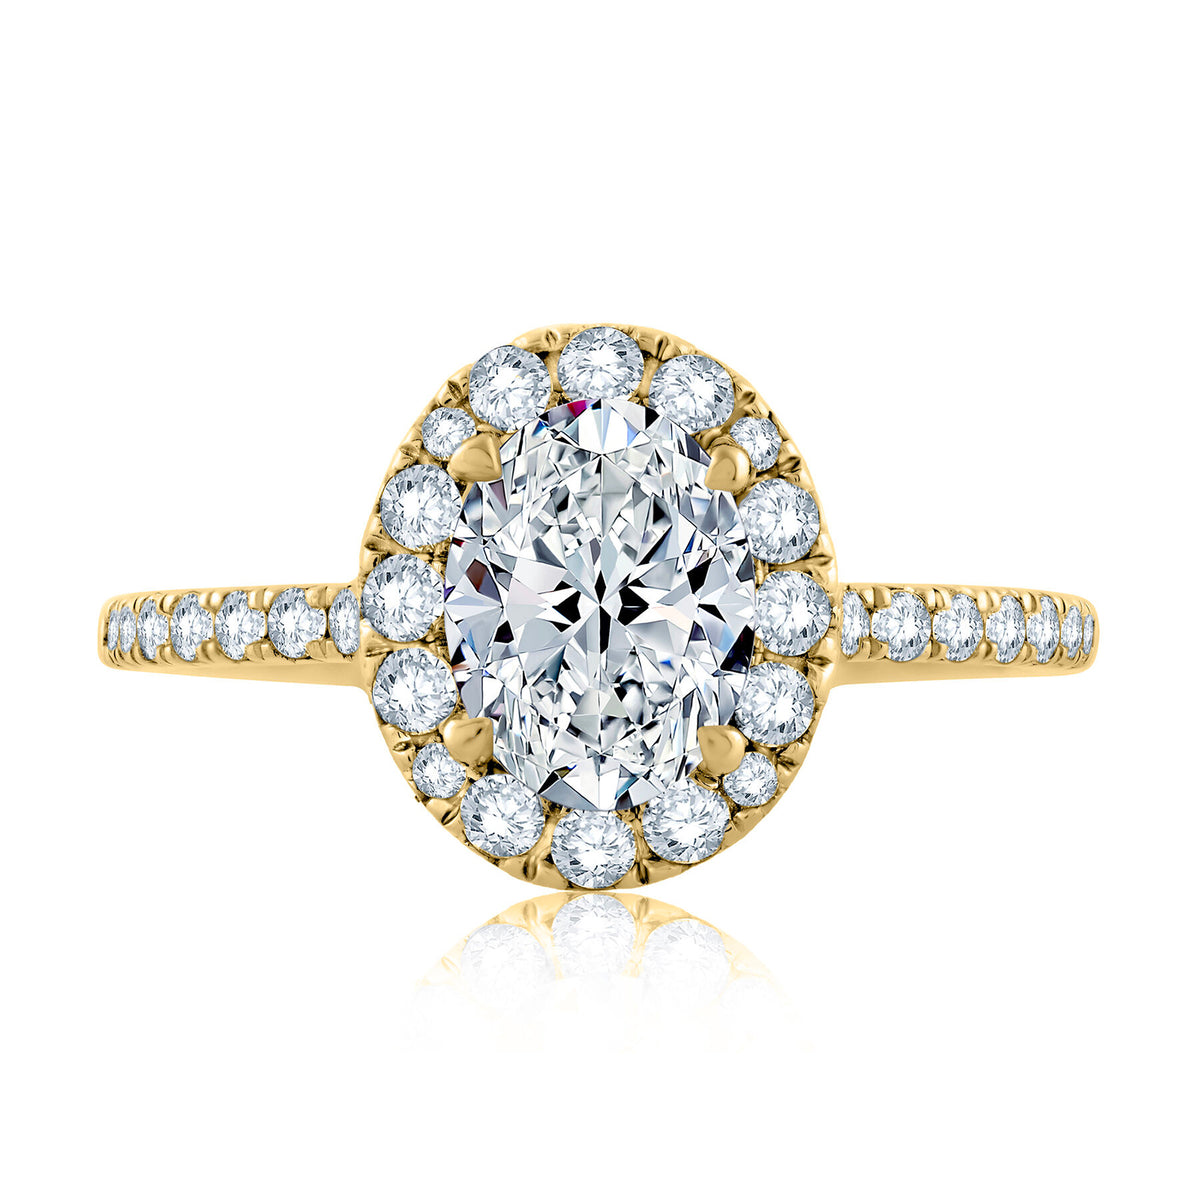 1 Carat Diamond Engagement Ring in Gold Solitaire - Melina Jewelry